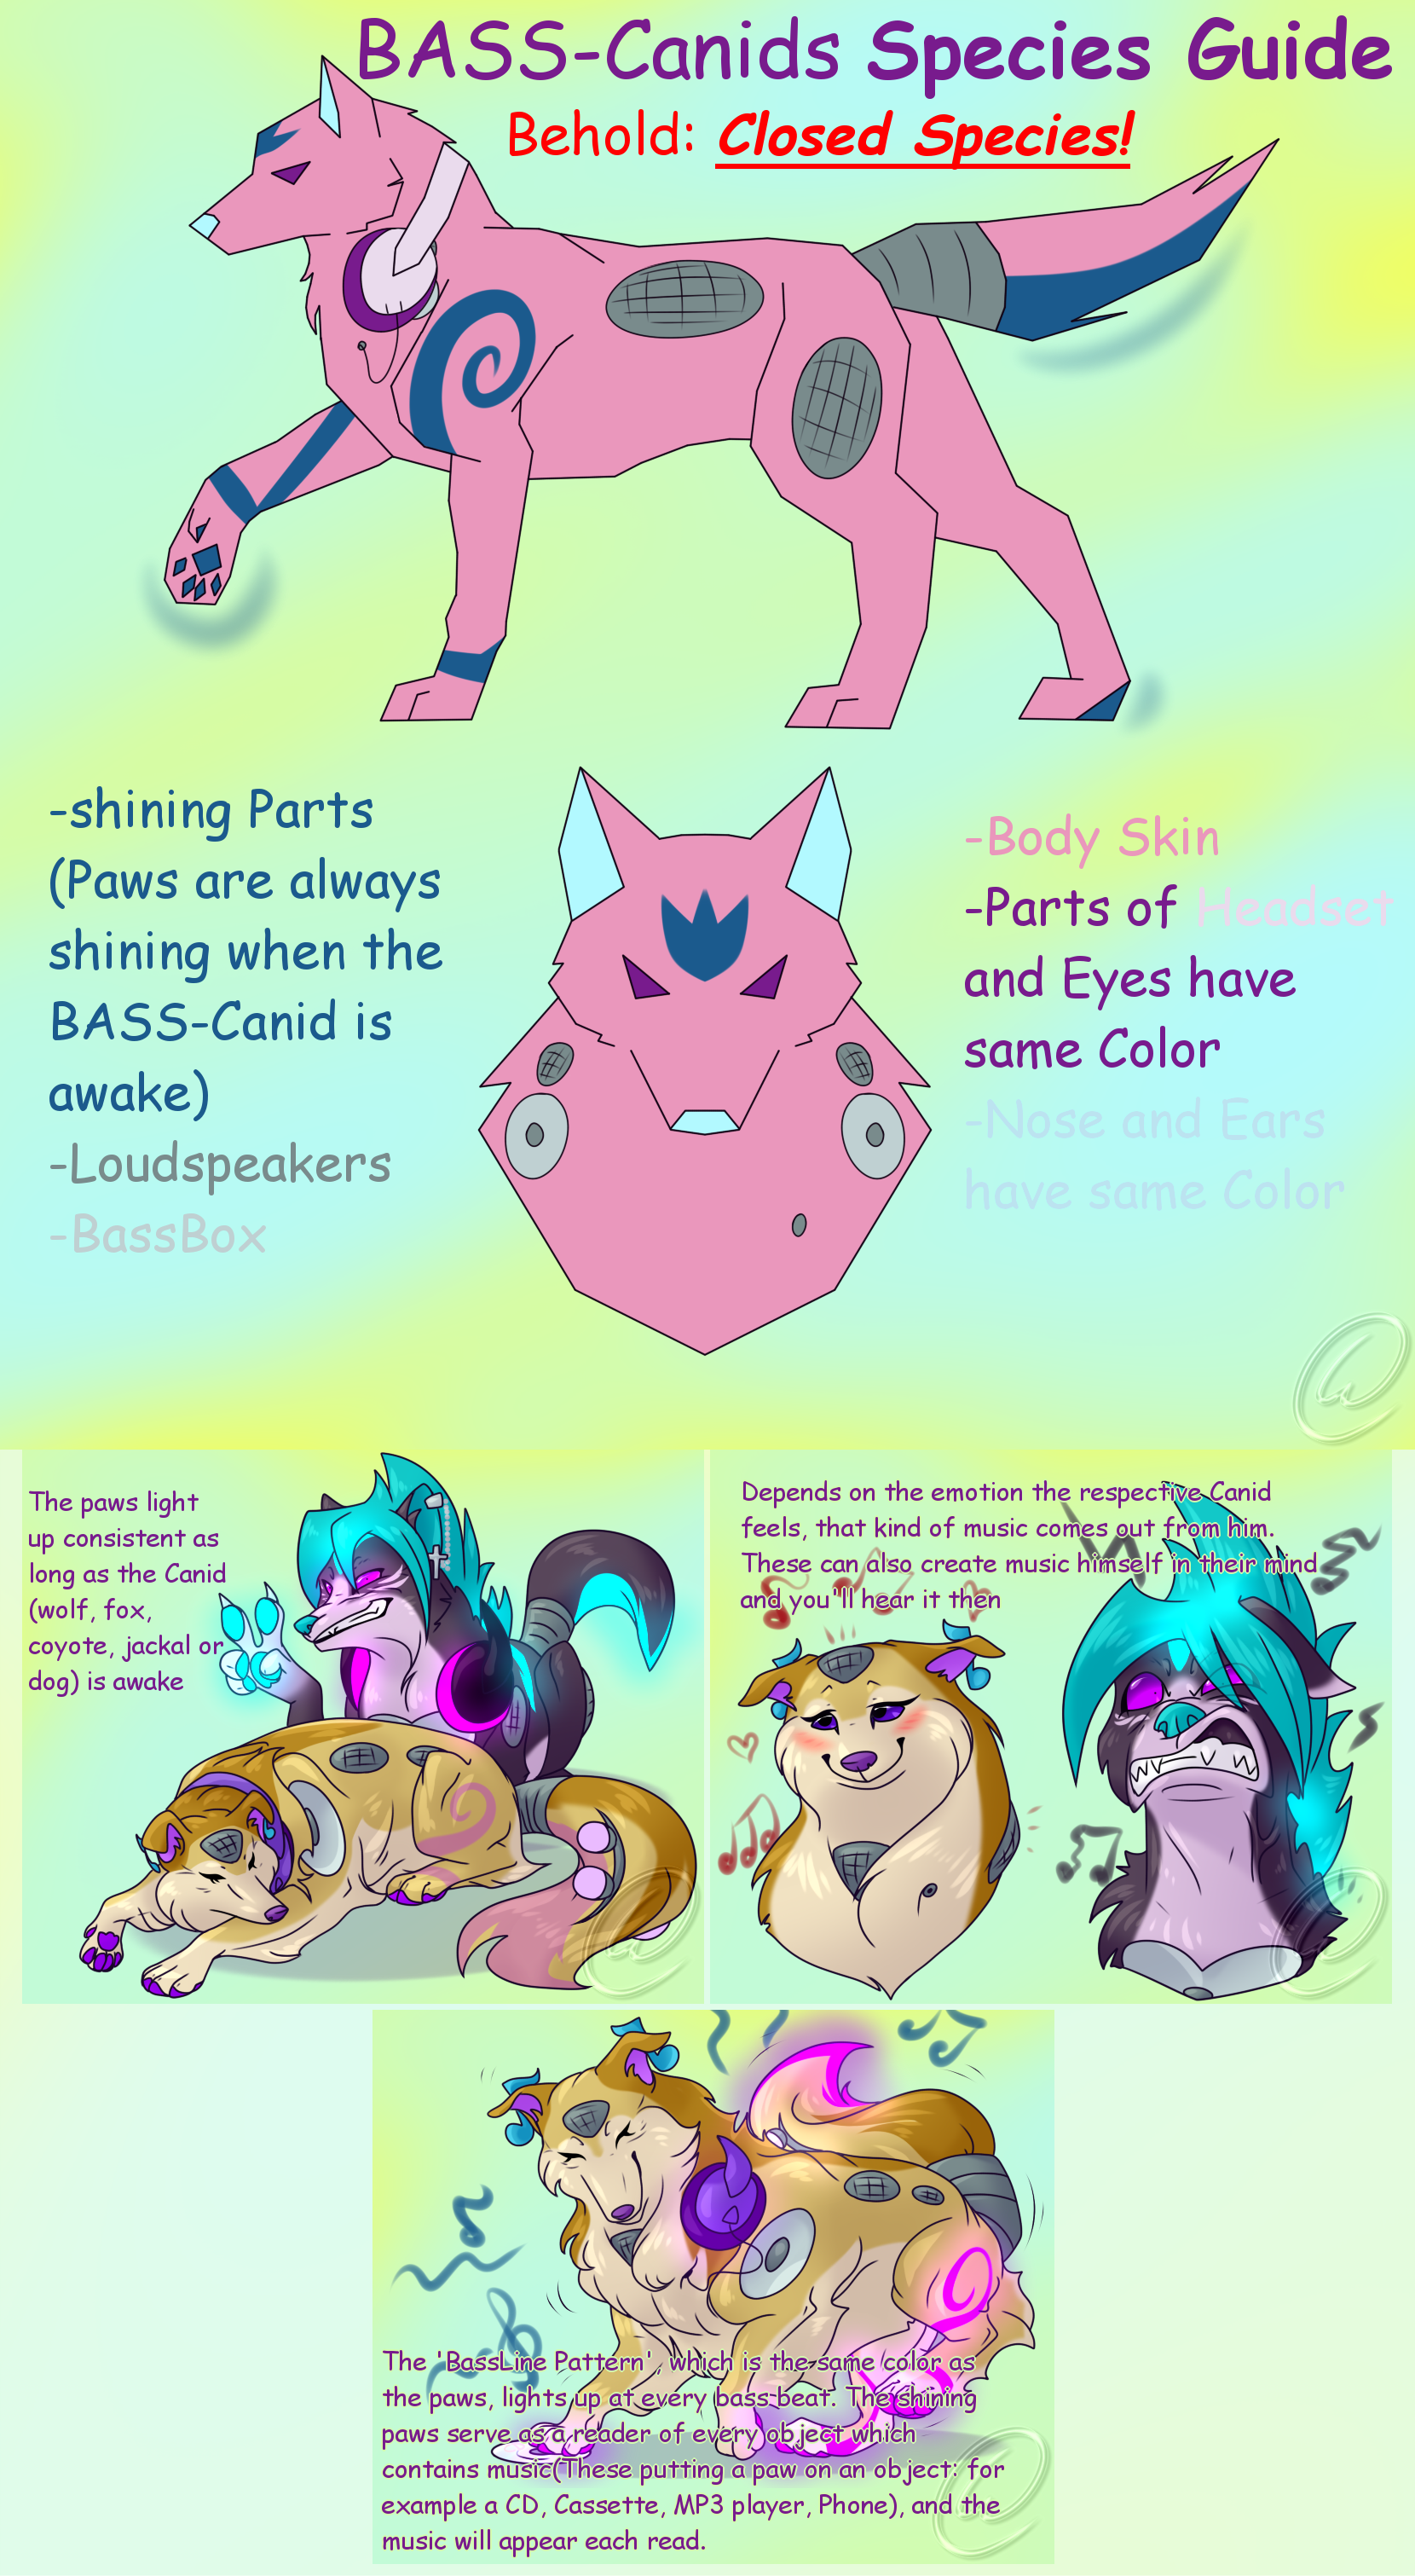 BASS-Canids Species Guide